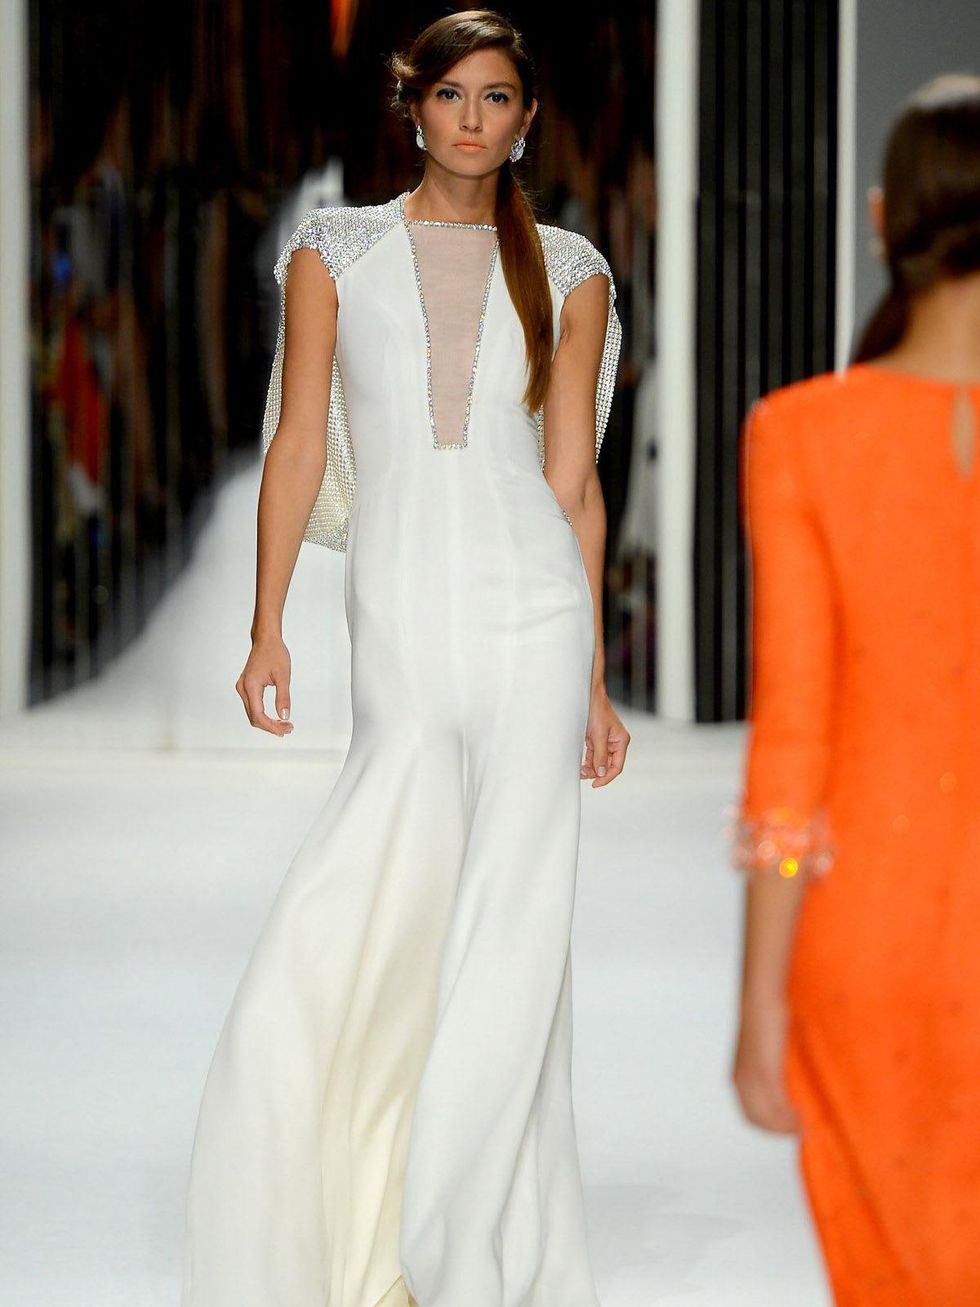 Clifford, Fashion Week spring 2013, Tuesday, Sept. 11, 2012, Jenny Packham, white gown